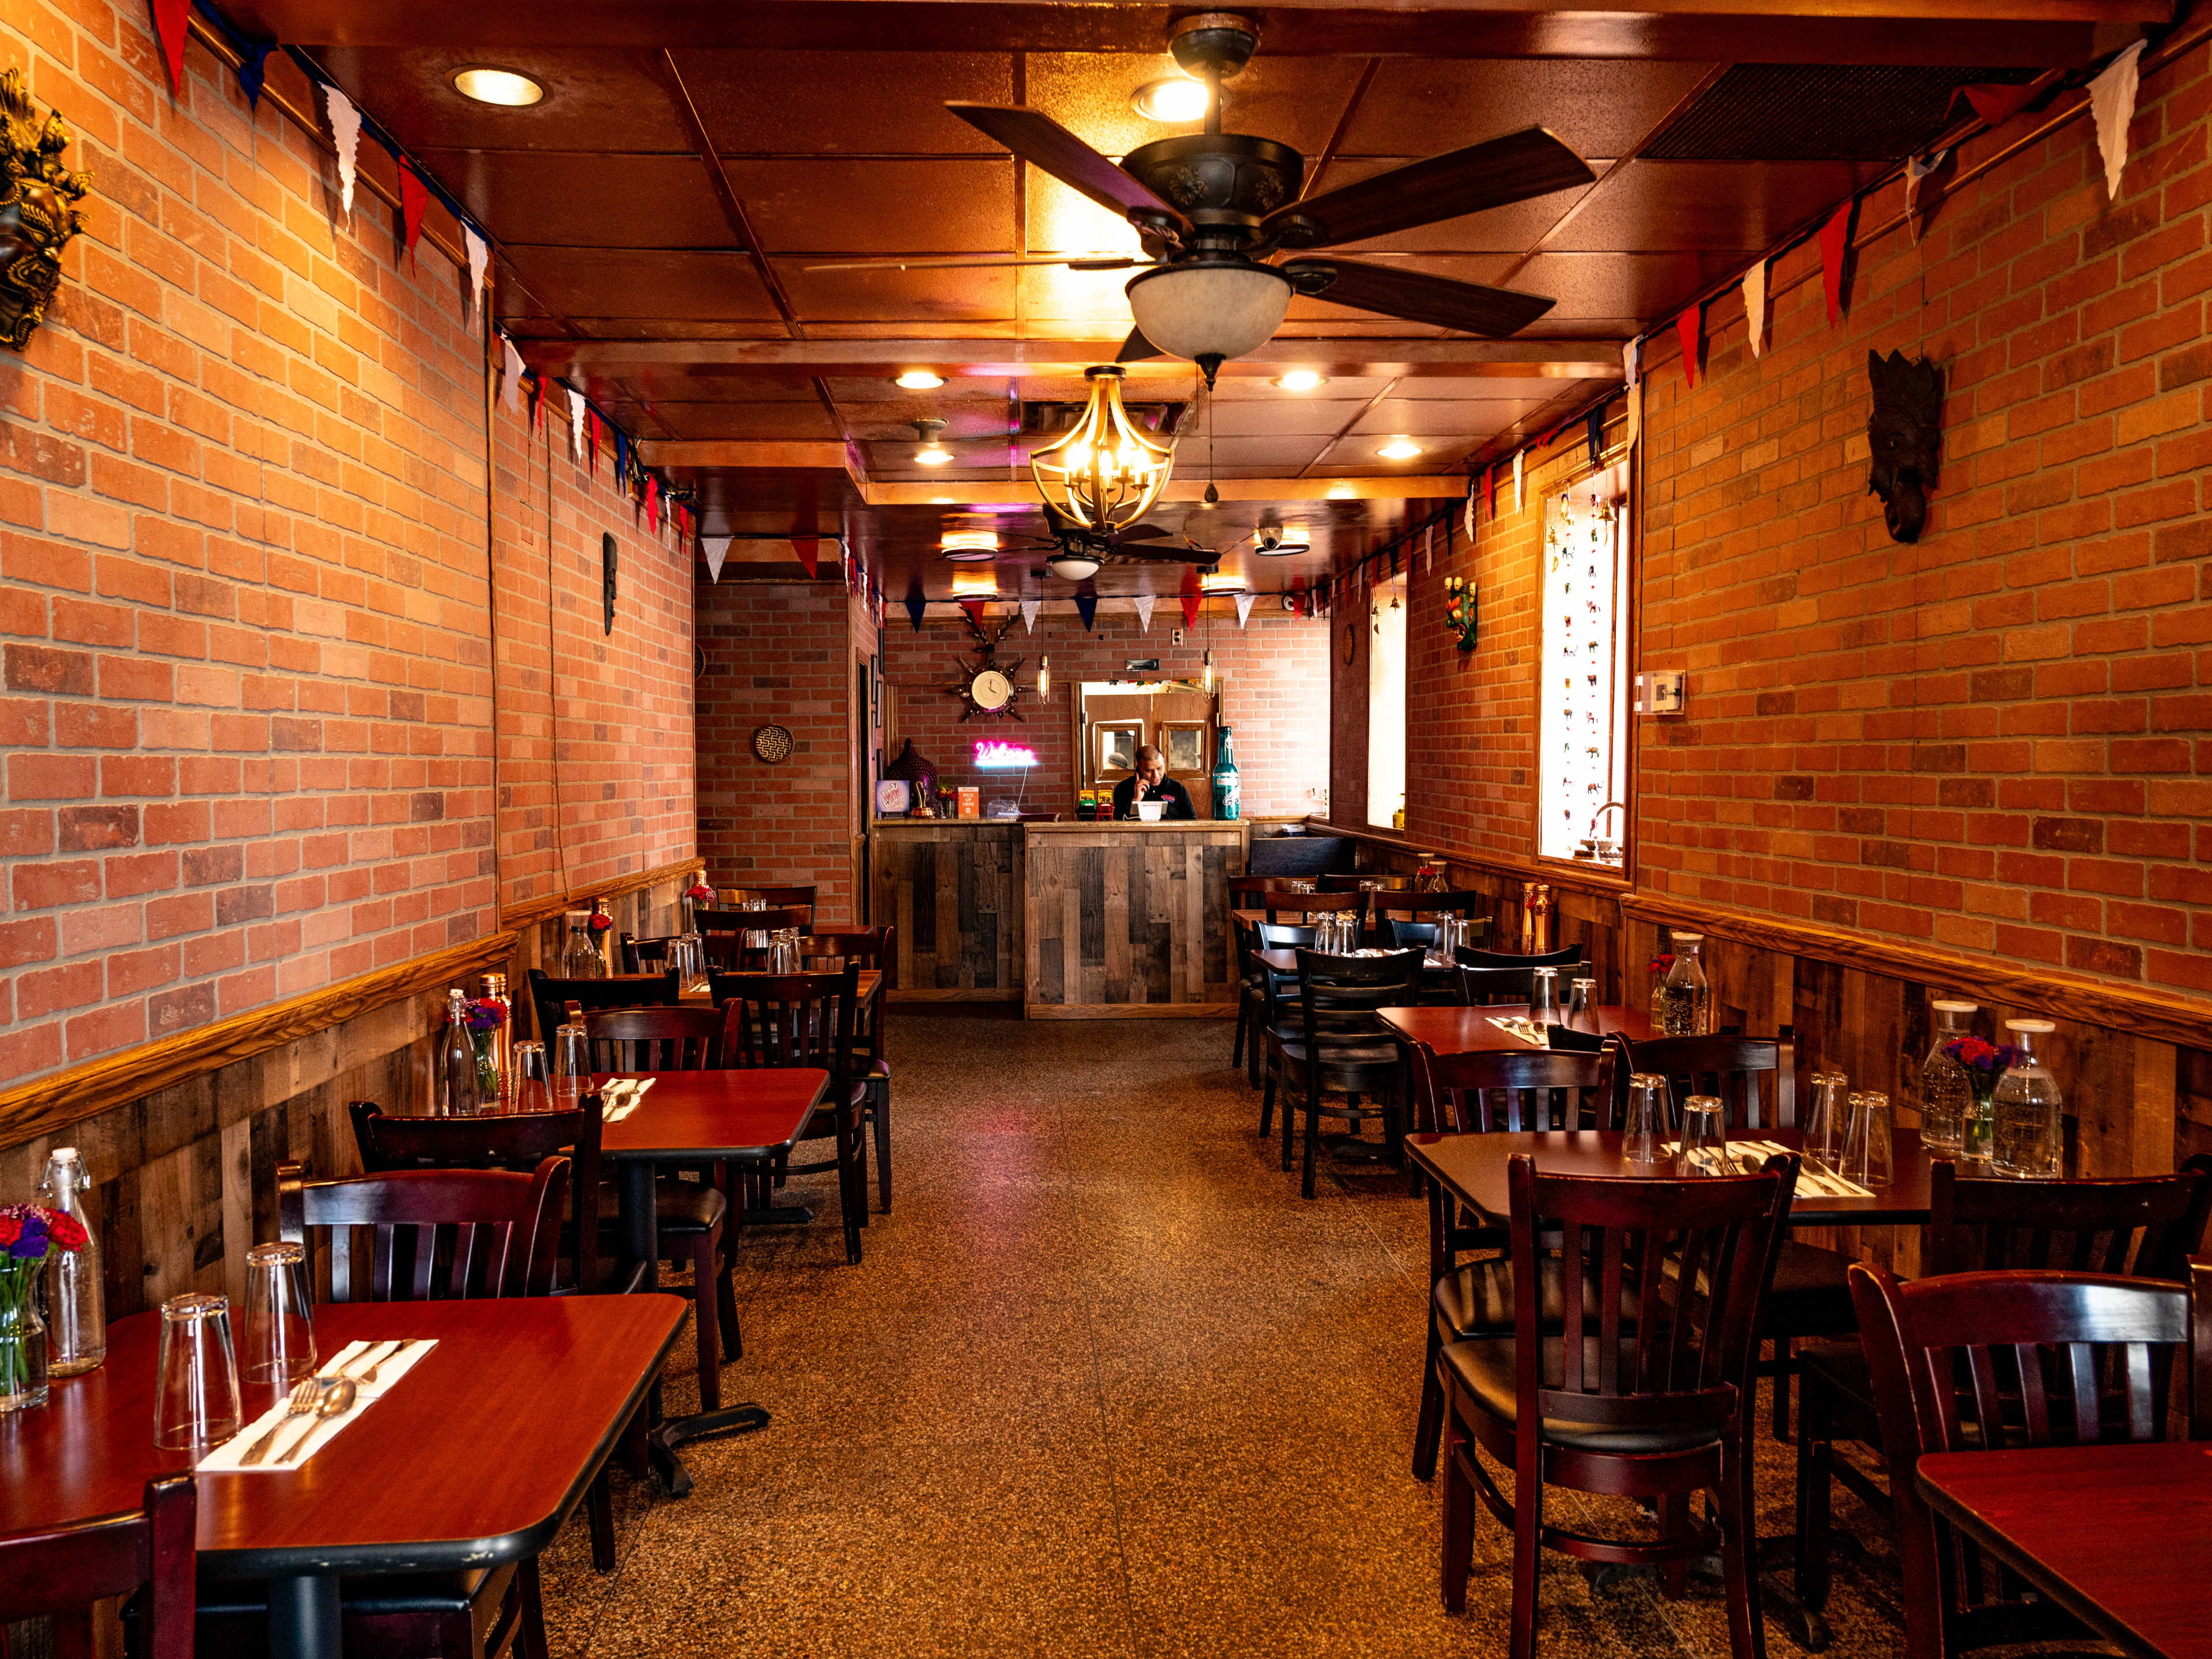 This is the interior of Nepali Momo Kitchen.